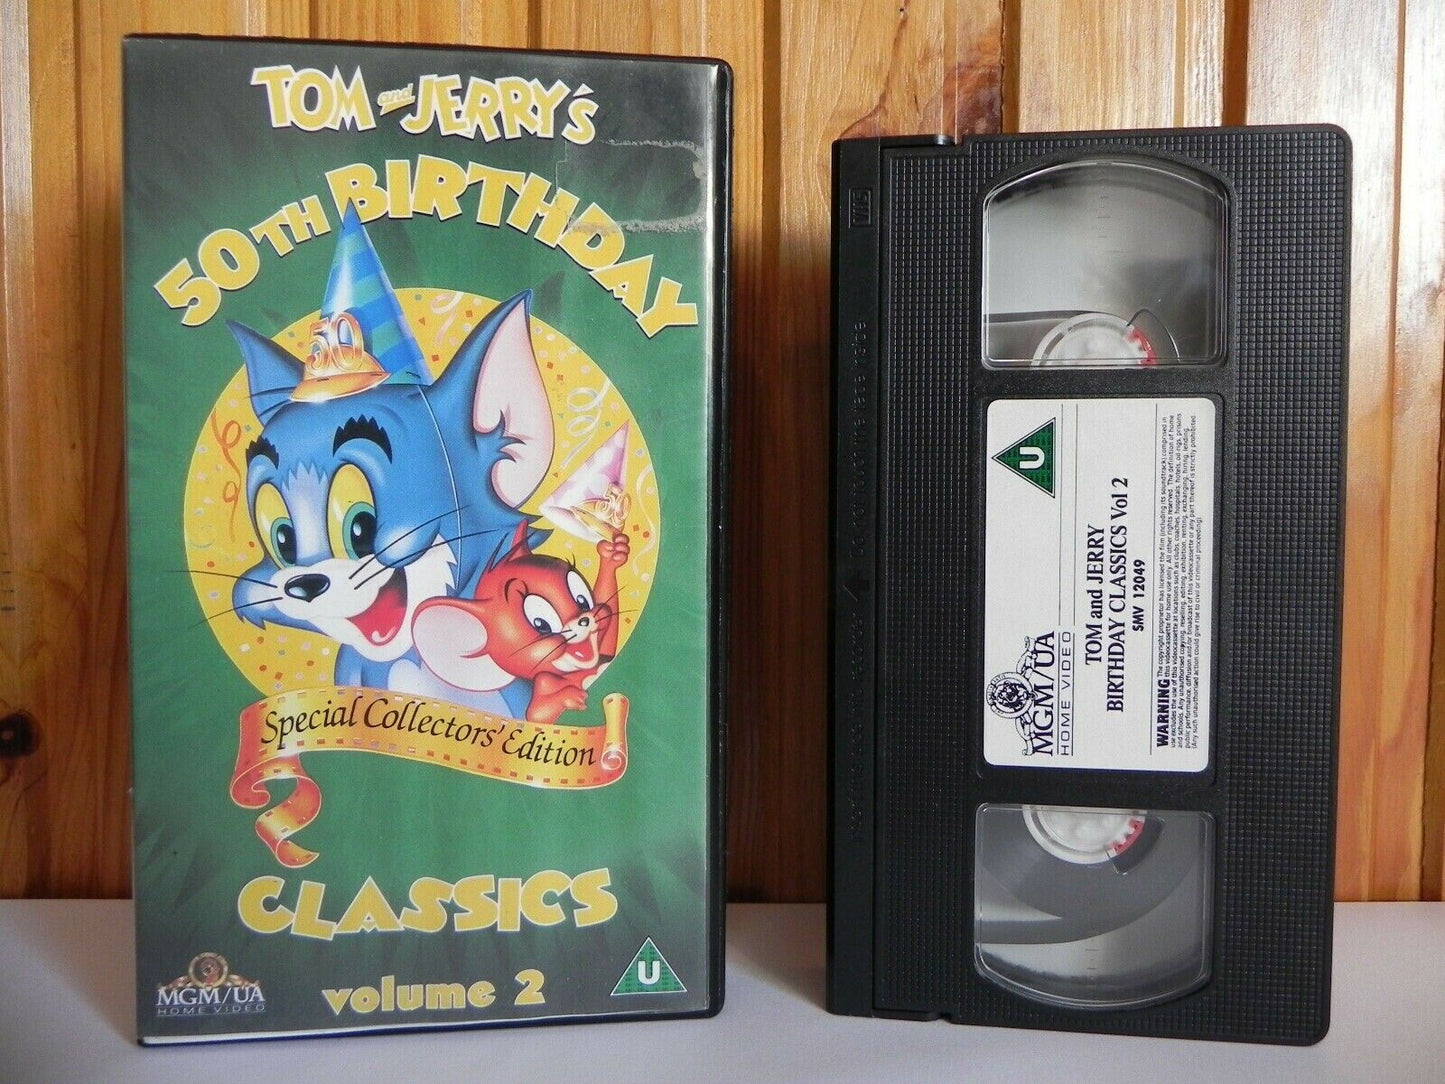 Tom And Jerry's: 50th Birthday Classics - Volume 2 - MGM/UA - Animated - Pal VHS-